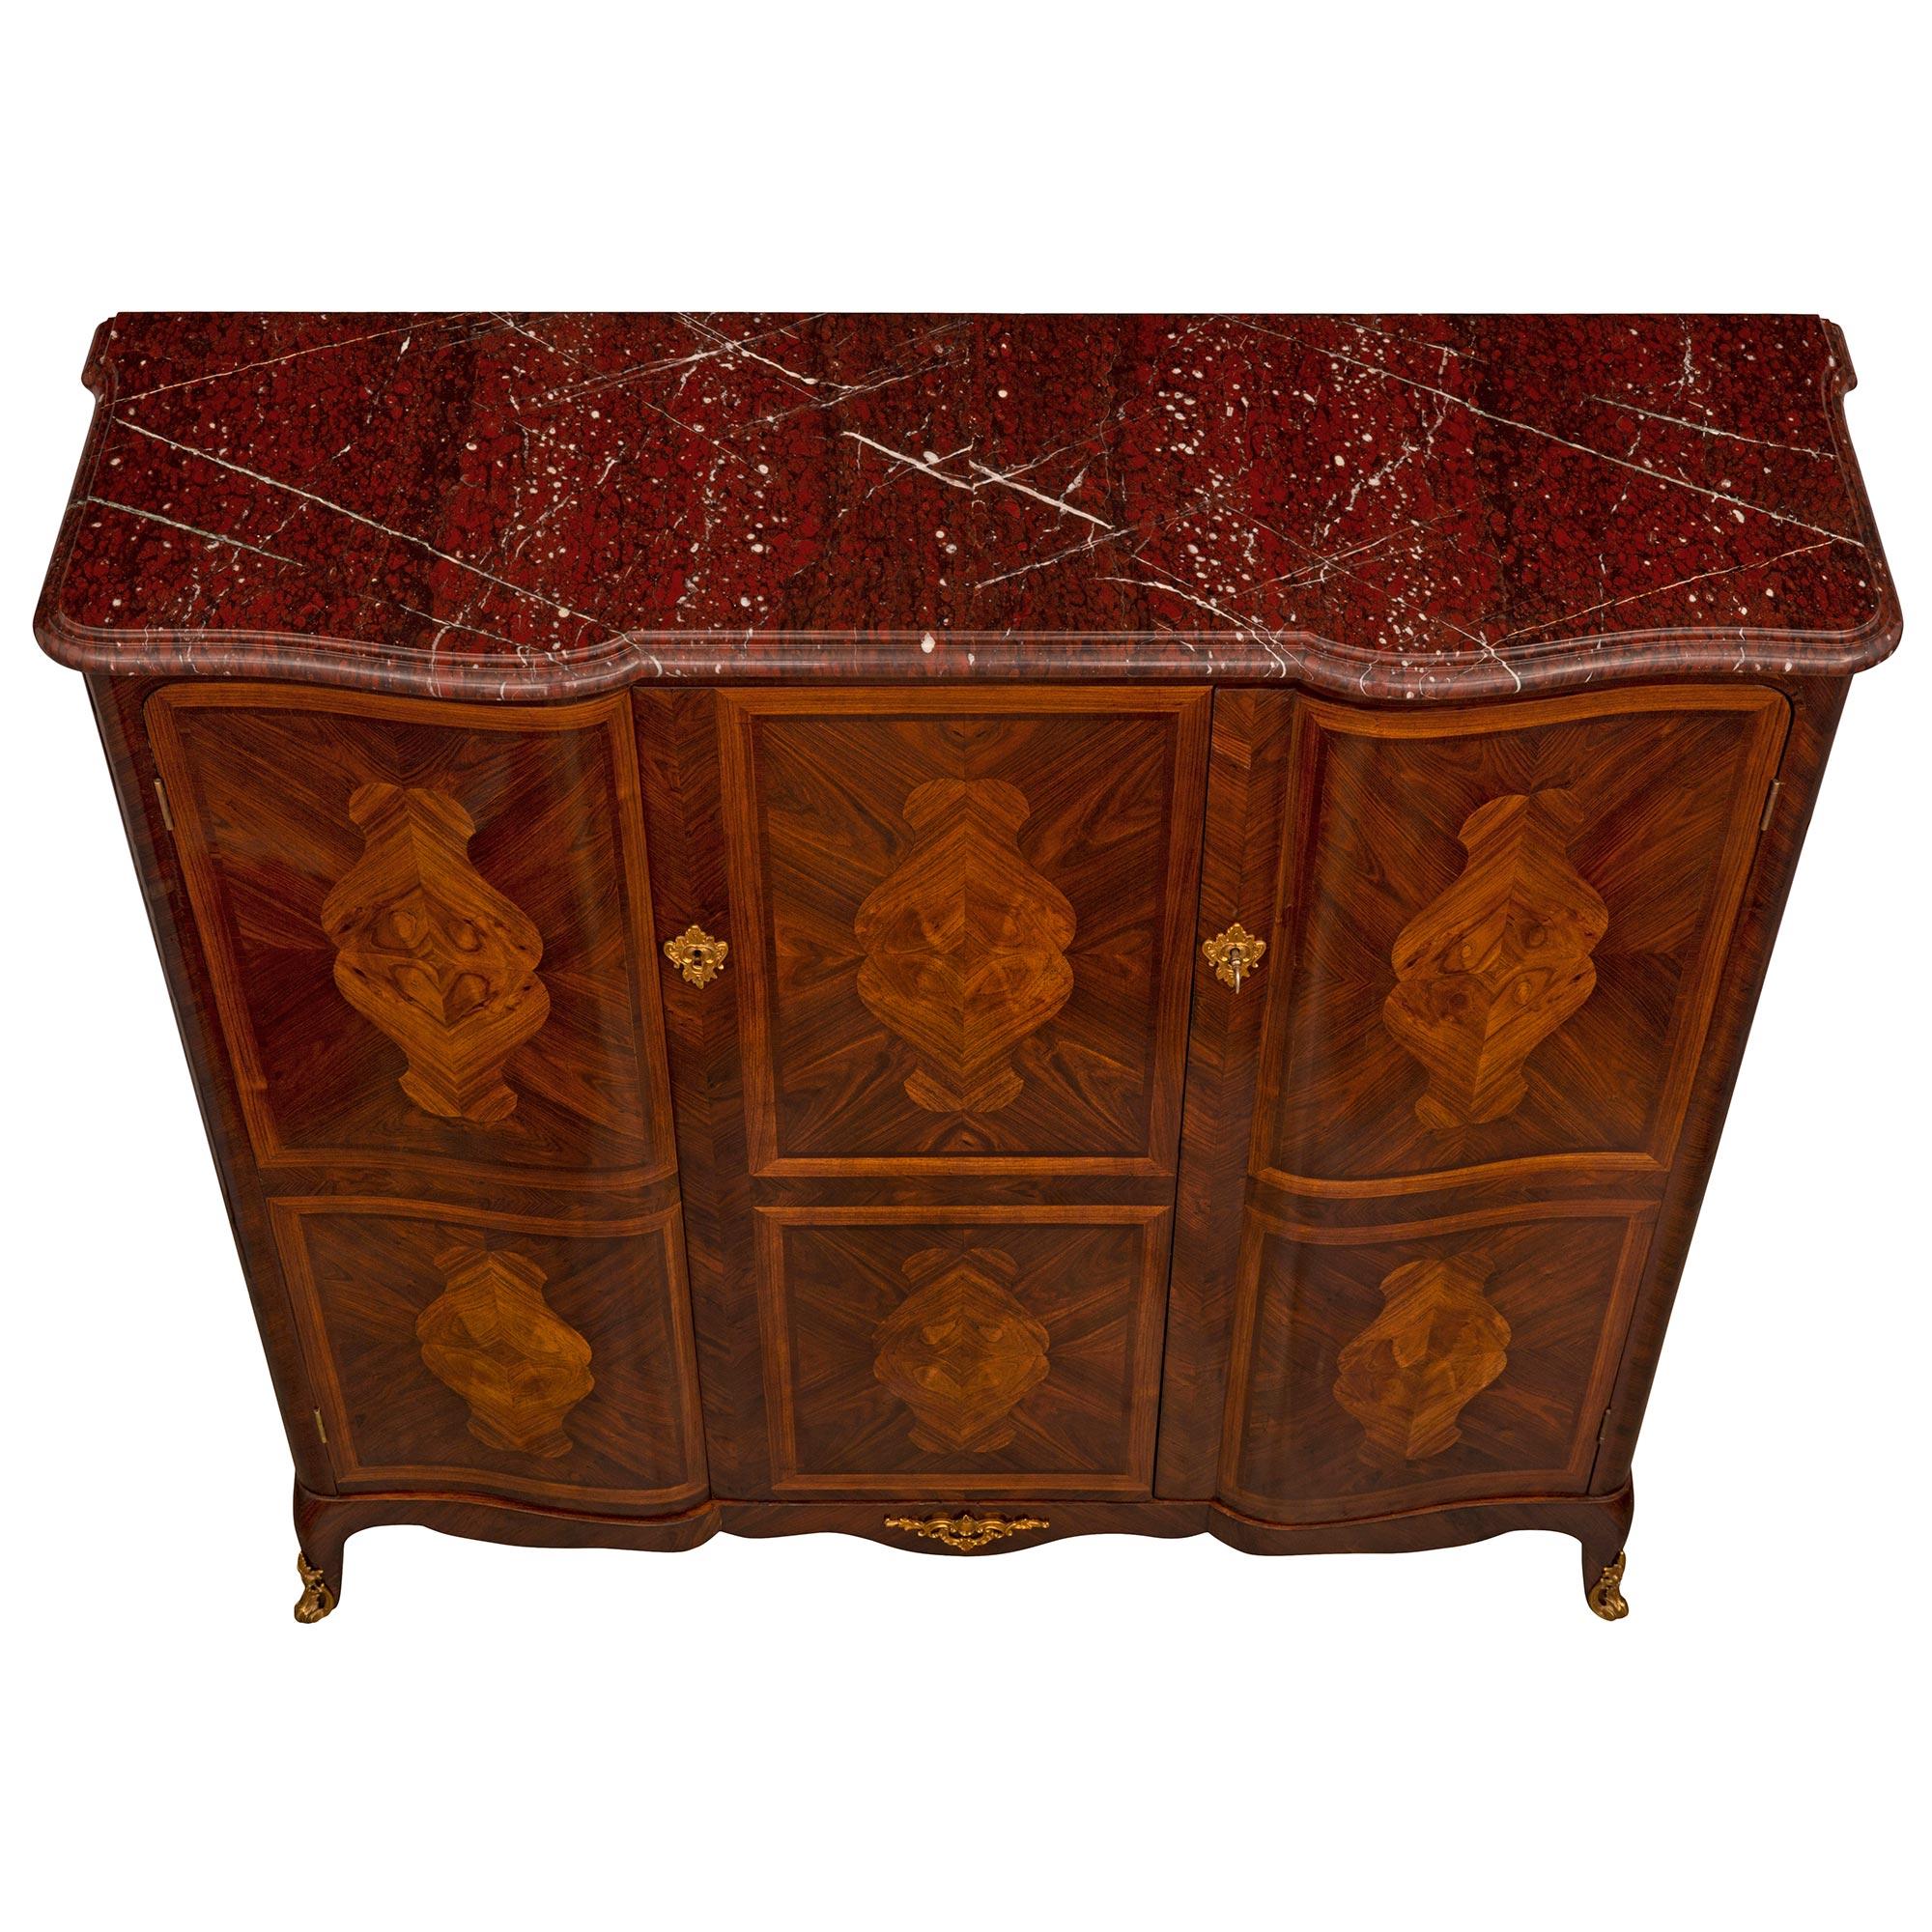 An elegant French 19th century Louis XV st. Kingwood, Tulipwood, ormolu, and Rouge Griotte marble cabinet. The three door cabinet à hauteur d'appui is raised by tapered lightly curved legs with fine pierced foliate ormolu sabots below the scallop